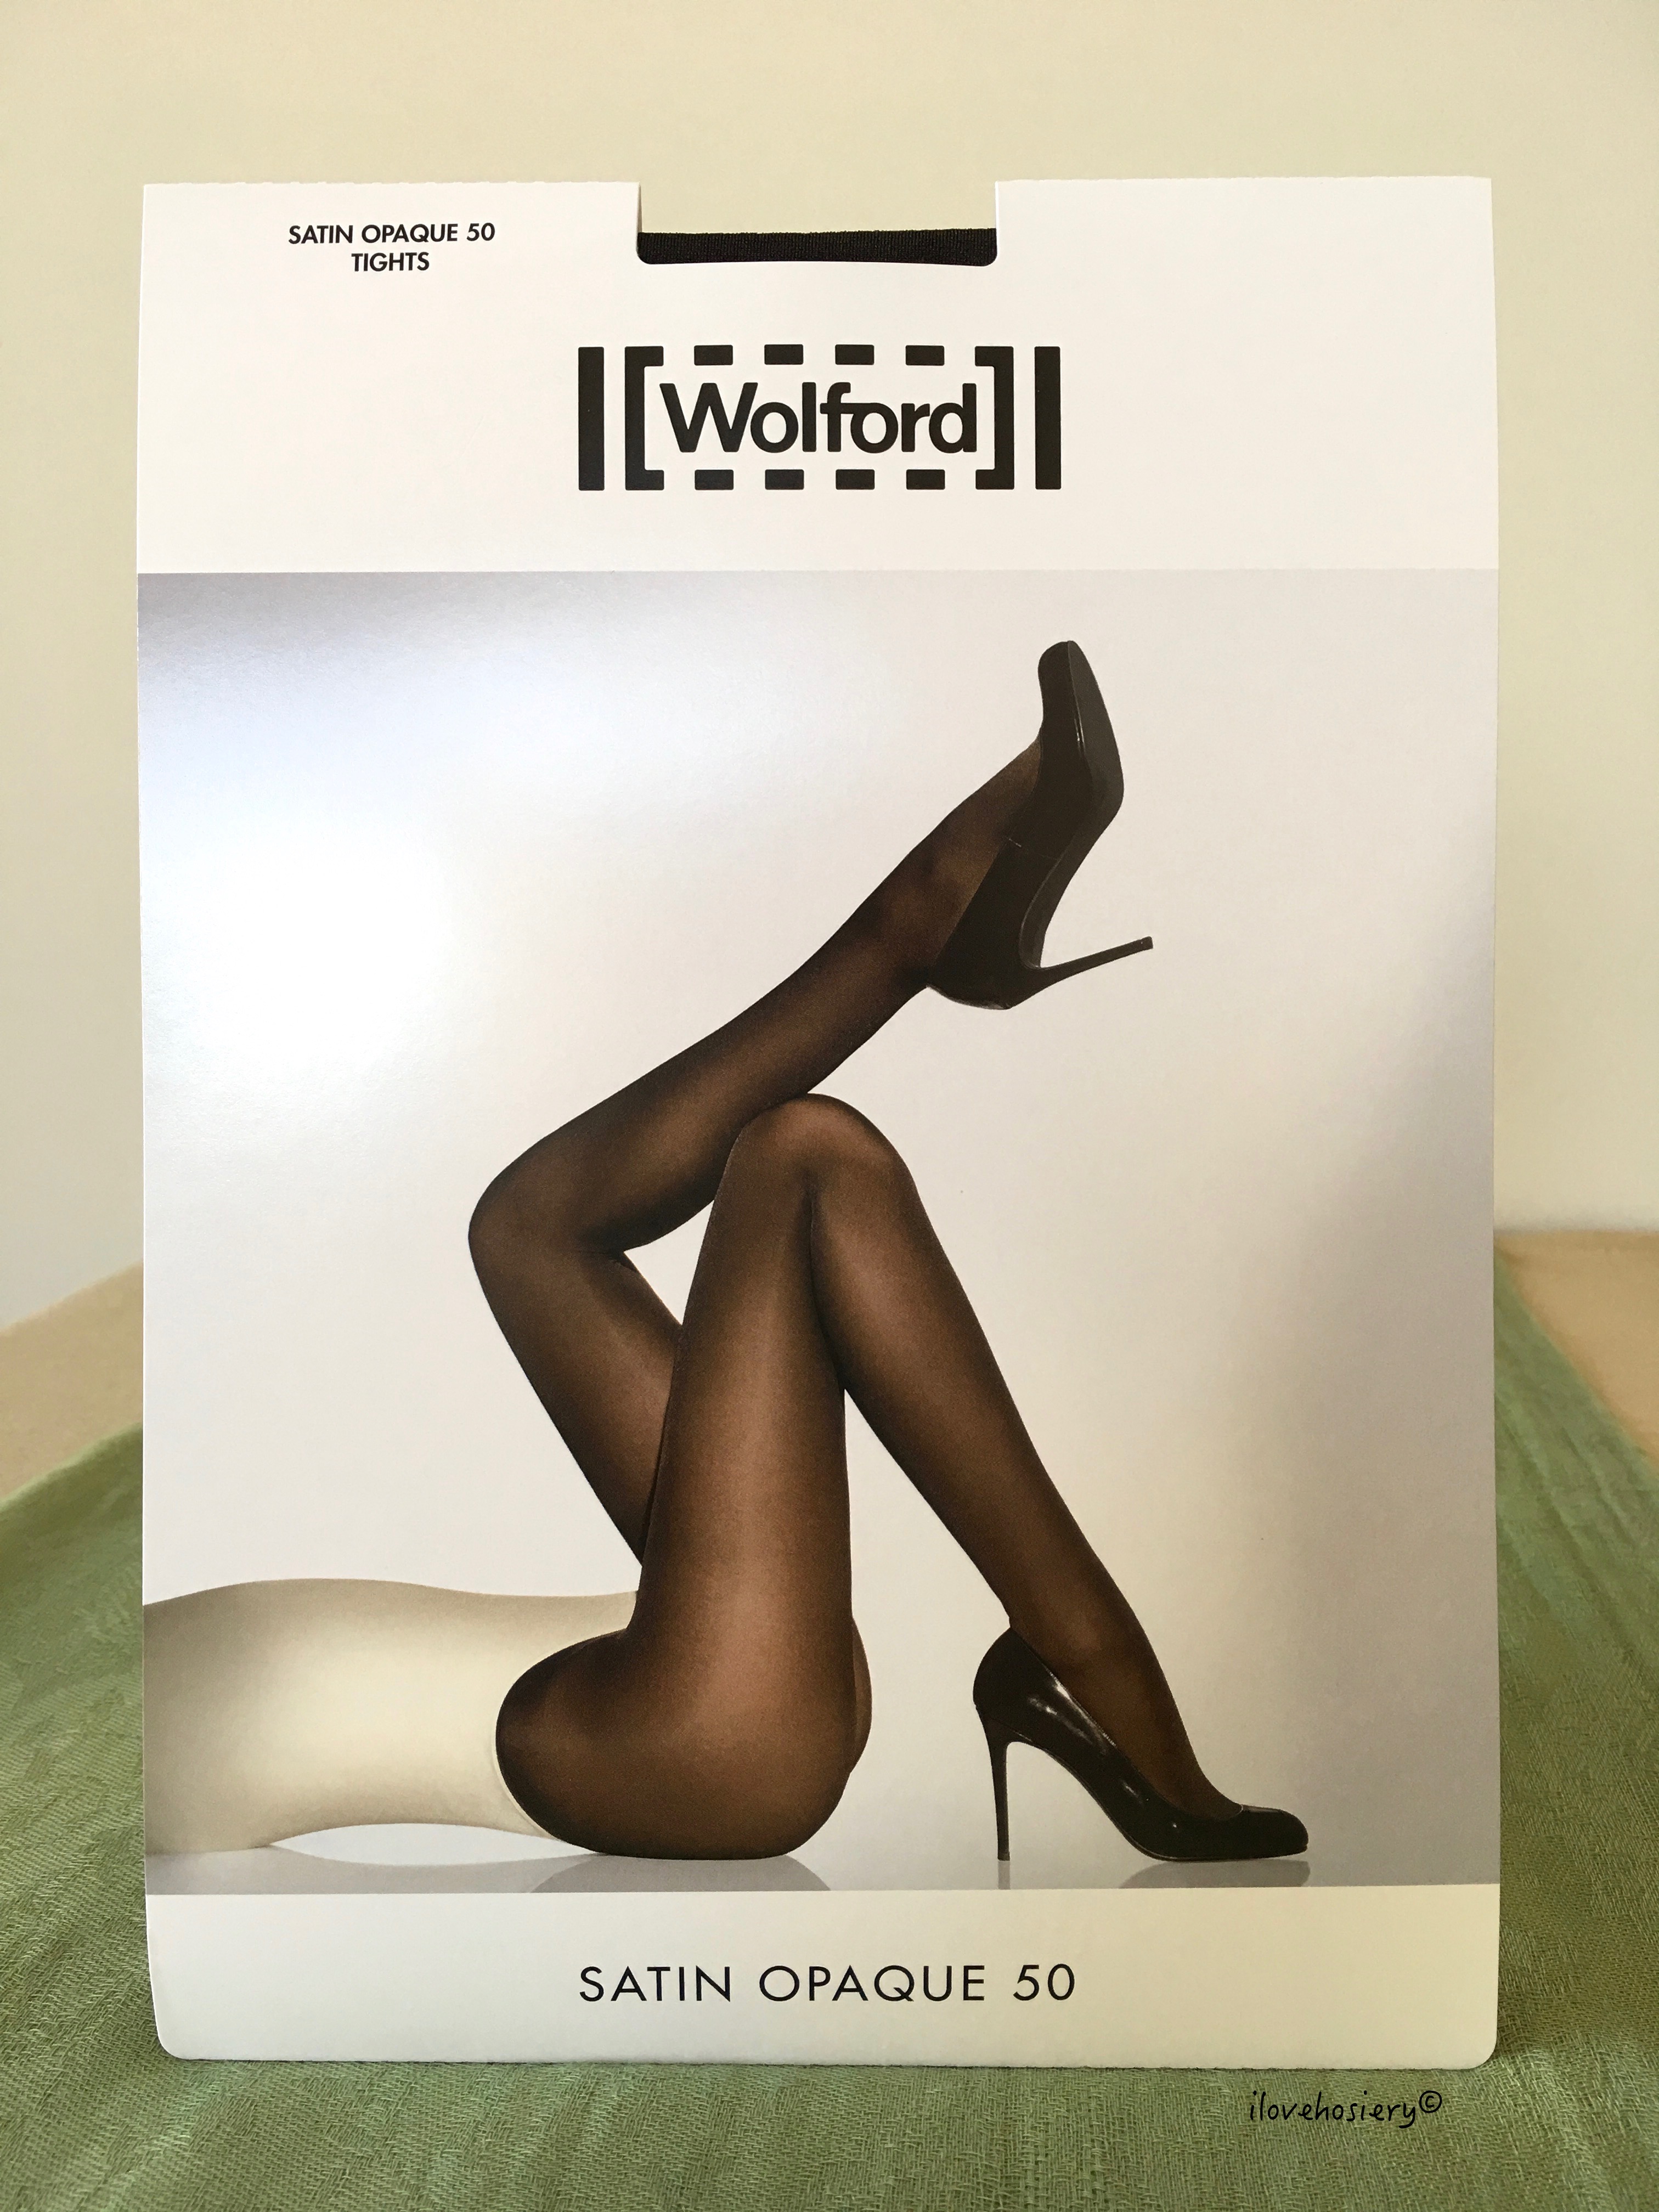 Wolford Pure 50 Tights In Stock At UK Tights